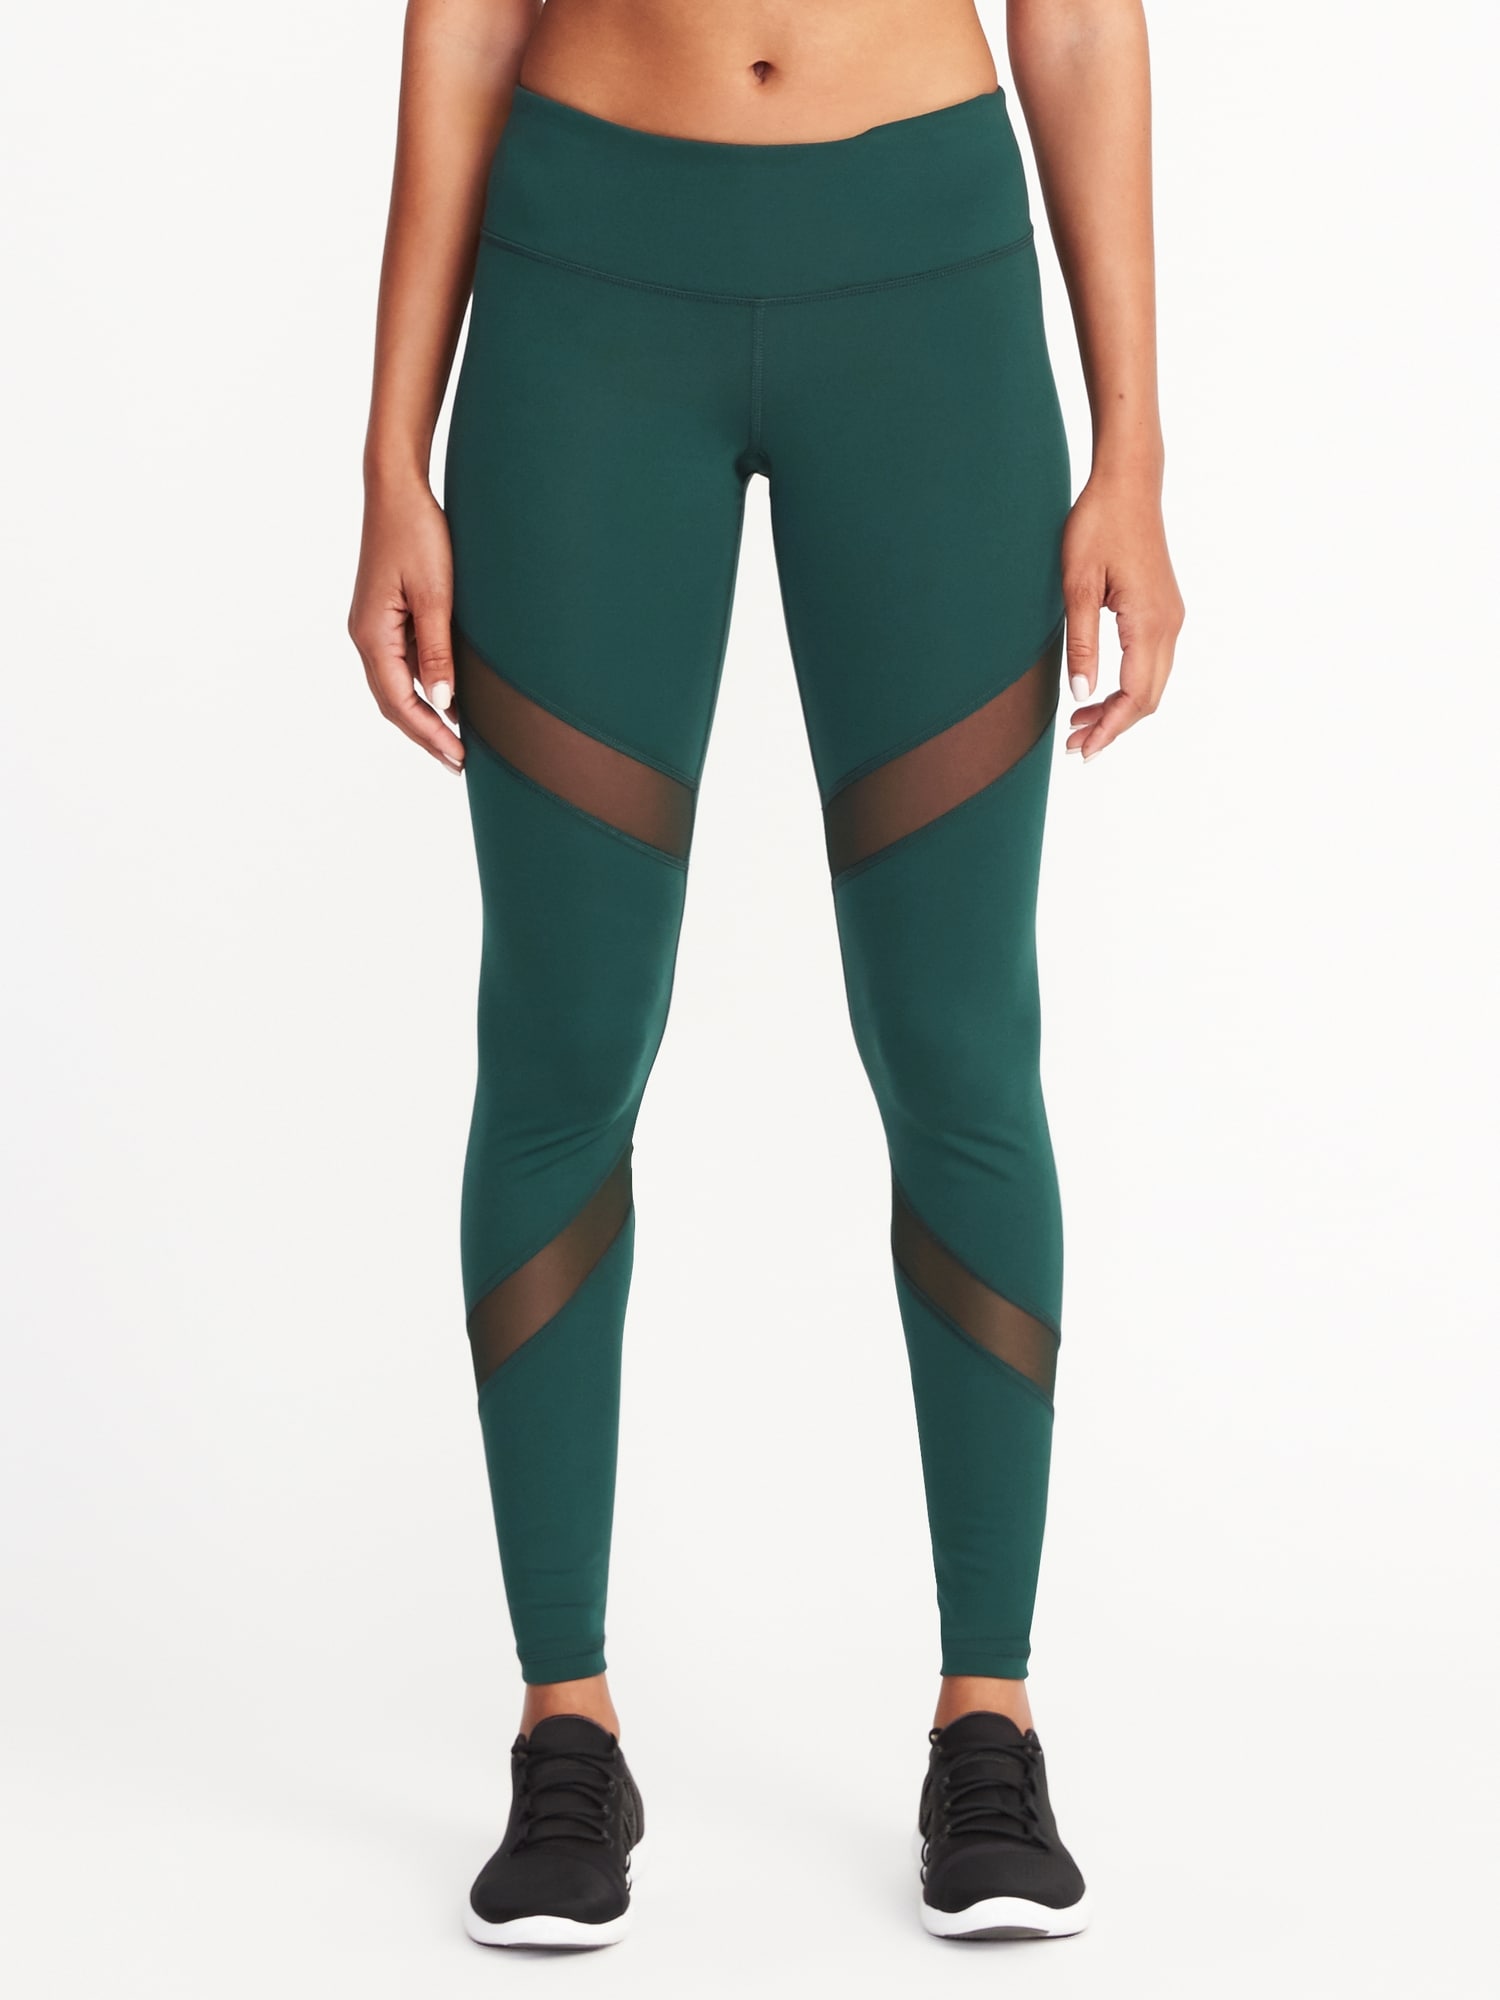 Old Navy - Mid-Rise Elevate Lightweight Compression Run Leggings for Women